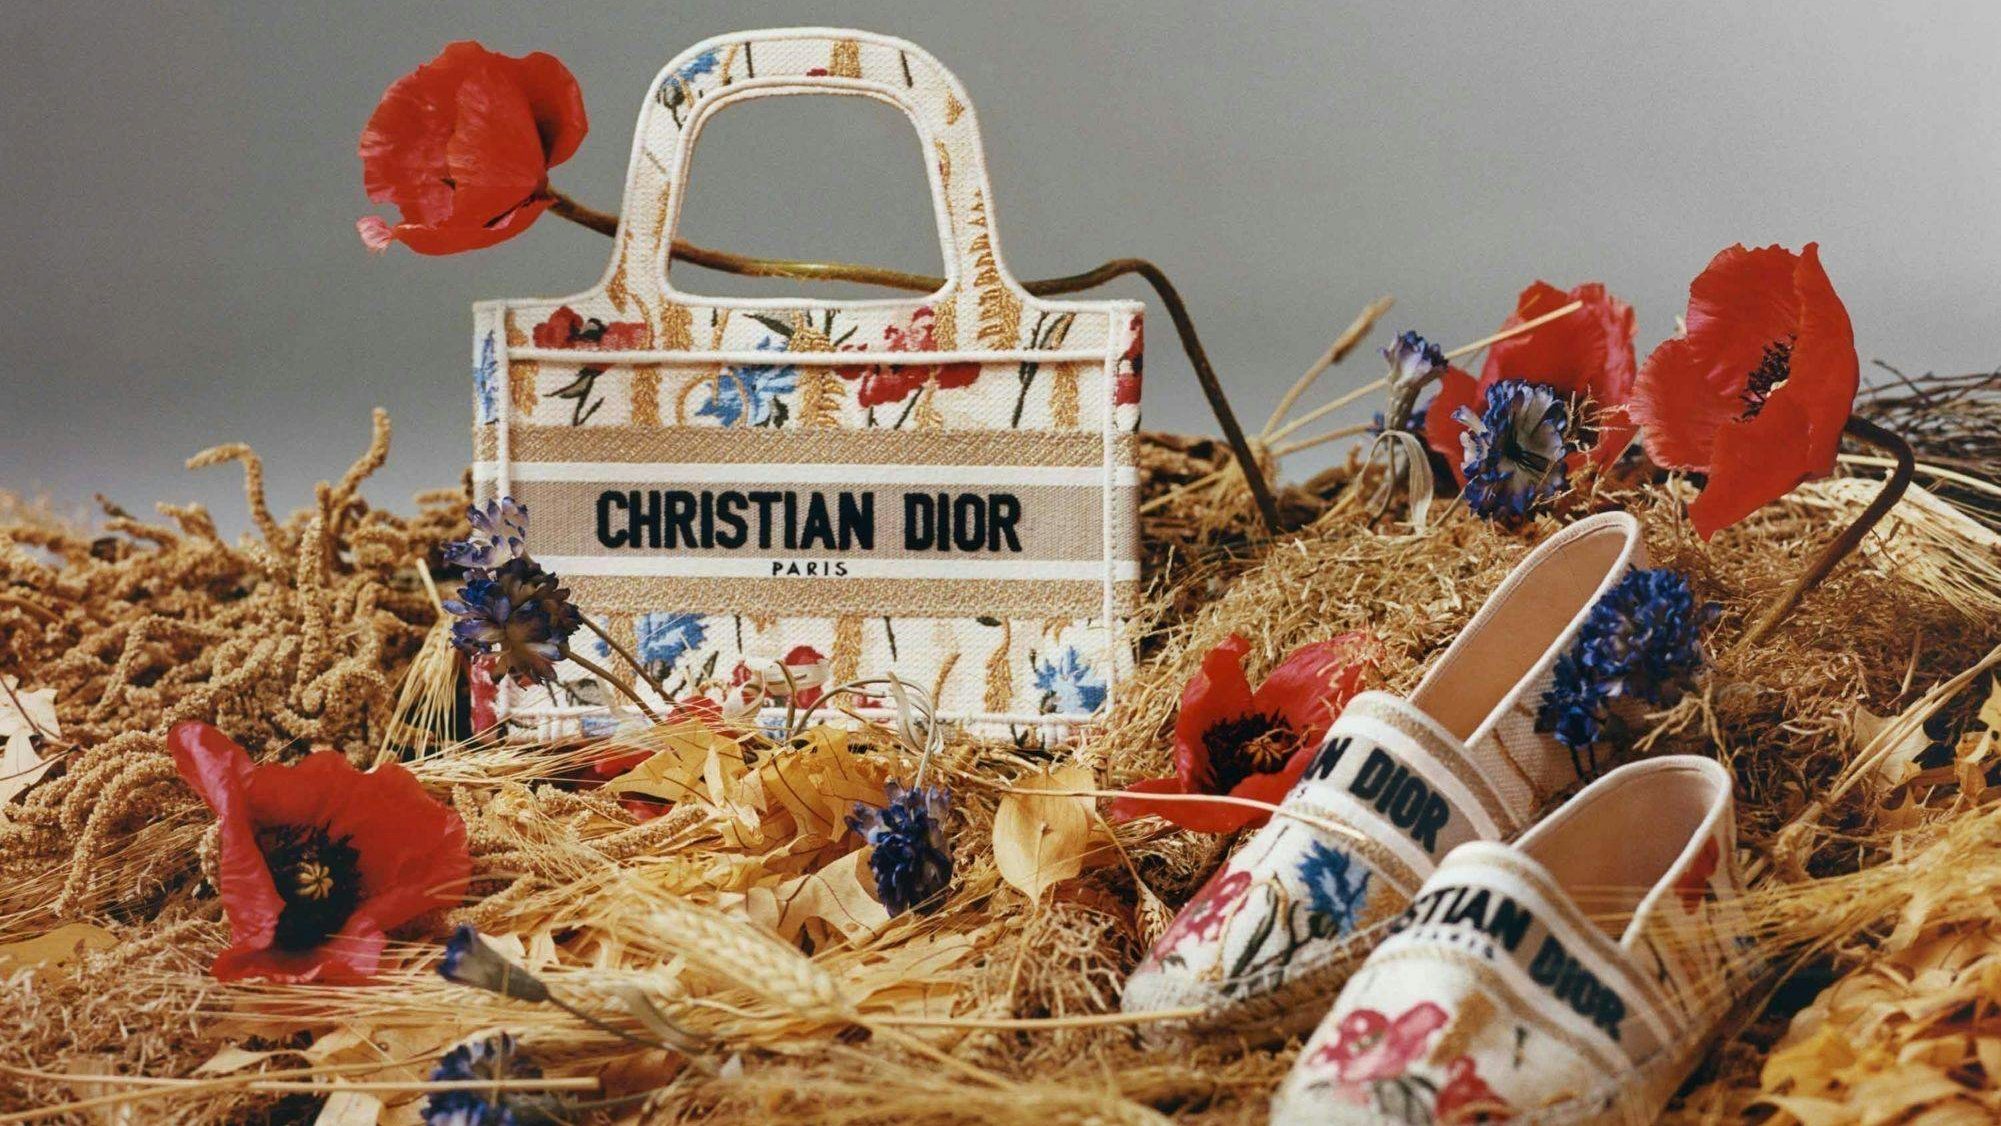 LVMH reported that revenue jumped 32 percent in the first quarter of 2021 to 14 billion euros, driven by its reigning champs Louis Vuitton and Dior. Photo: Courtesy of Dior